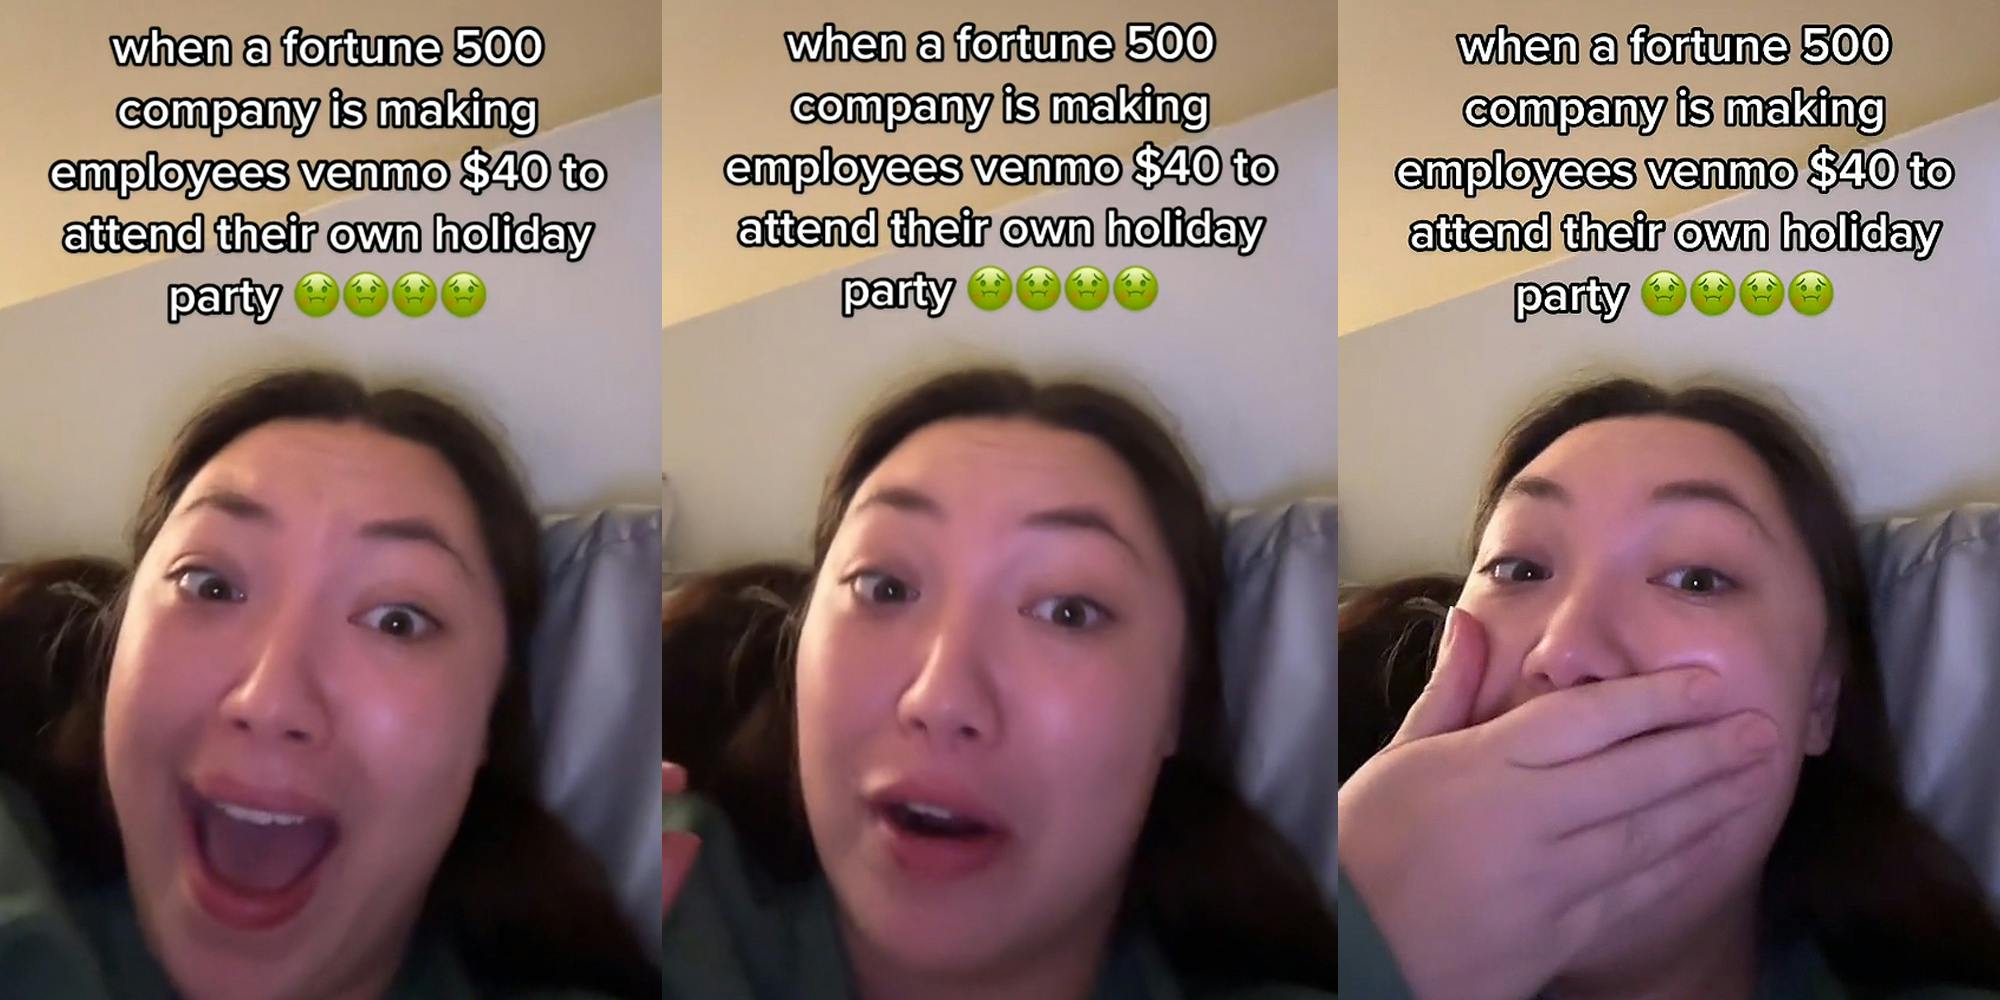 woman on bed speaking caption 'when a fortune 500 company is making employees venmo $40 to attend their own holiday party' (l) woman on bed speaking caption 'when a fortune 500 company is making employees venmo $40 to attend their own holiday party' (c) woman on bed with hand on mouth caption 'when a fortune 500 company is making employees venmo $40 to attend their own holiday party' (r)